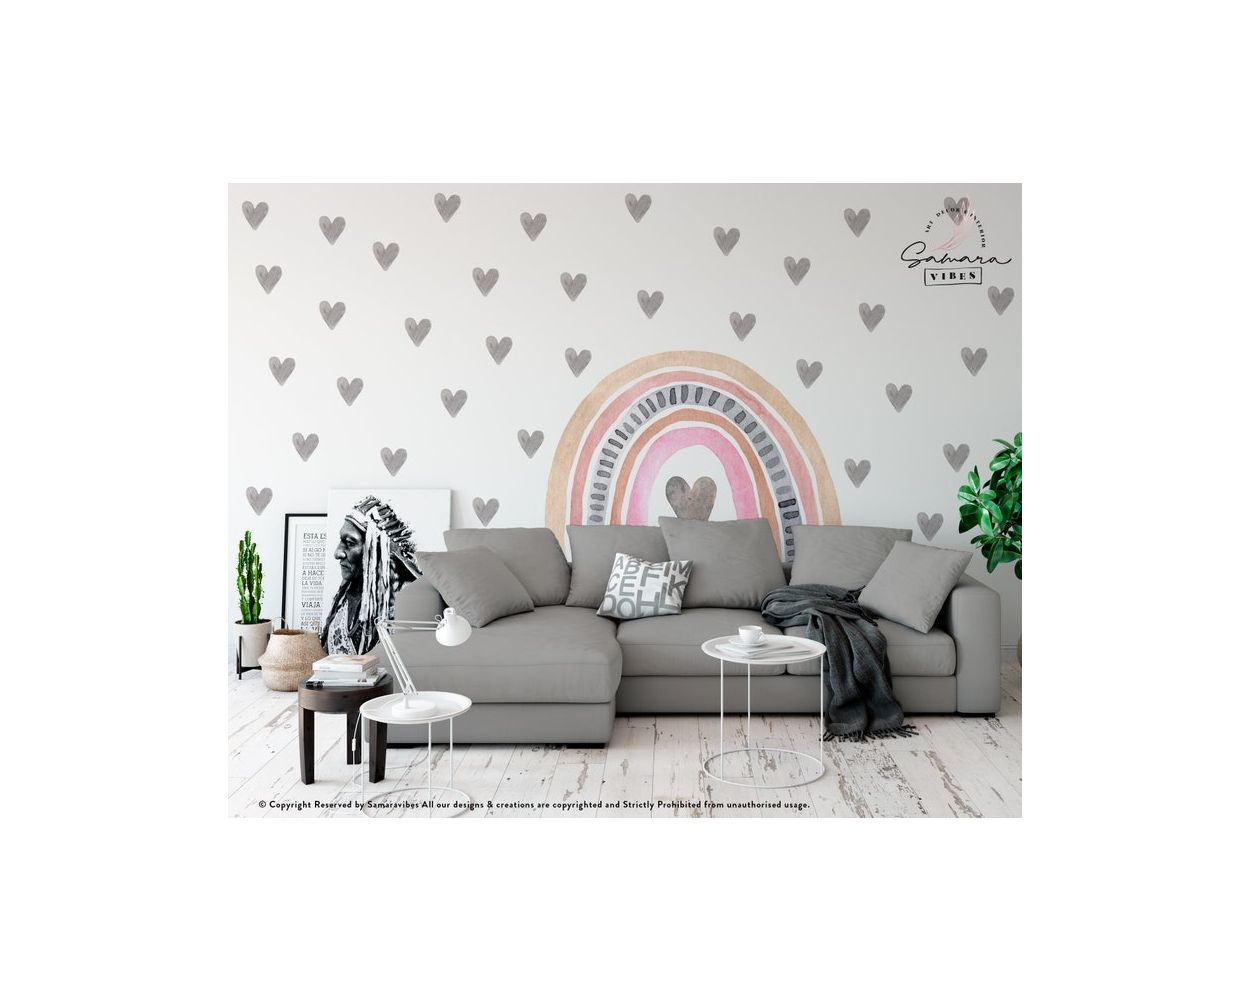 Cute and Best Rainbow with Heart vinyl Wall Decals for Kids Room Decor